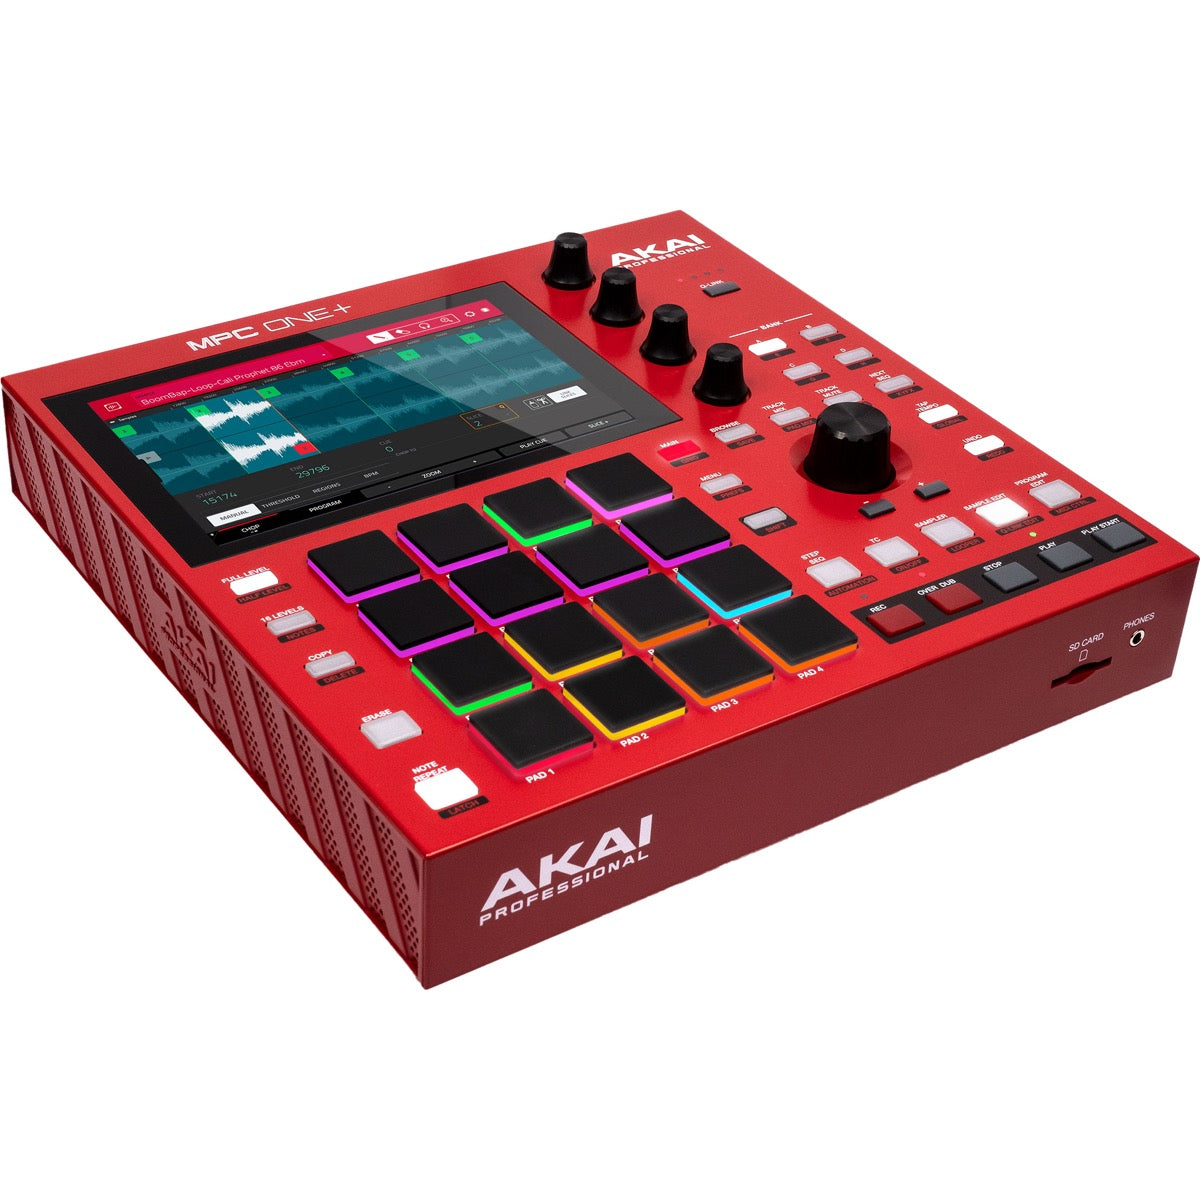 Akai Professional MPC One+ Standalone Music Production Center View 4